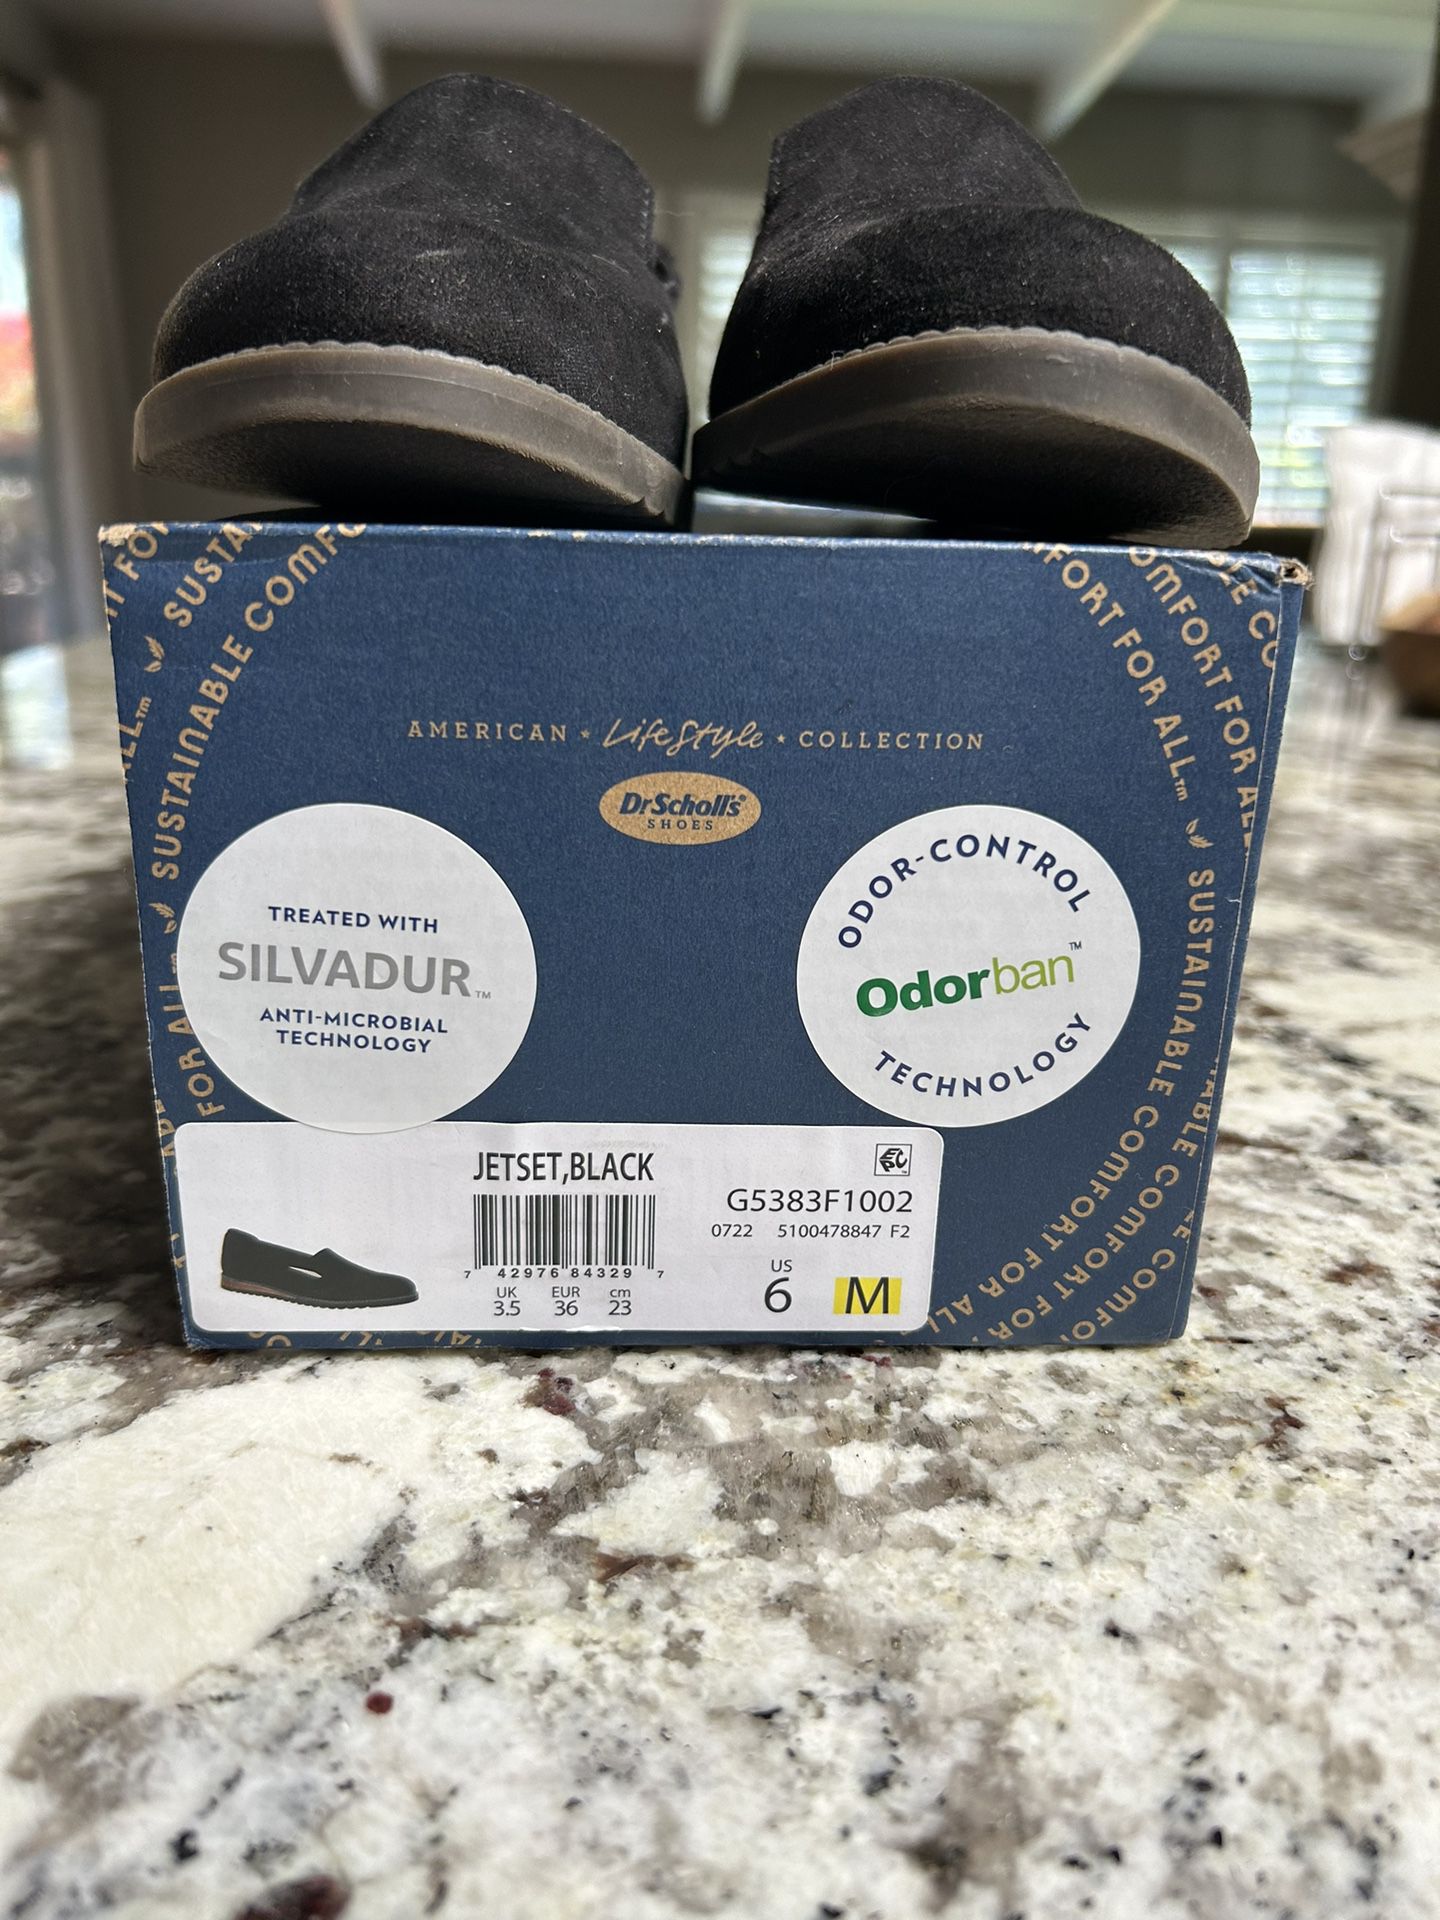 DrScholl’s Woman’s Shoes - Loafers